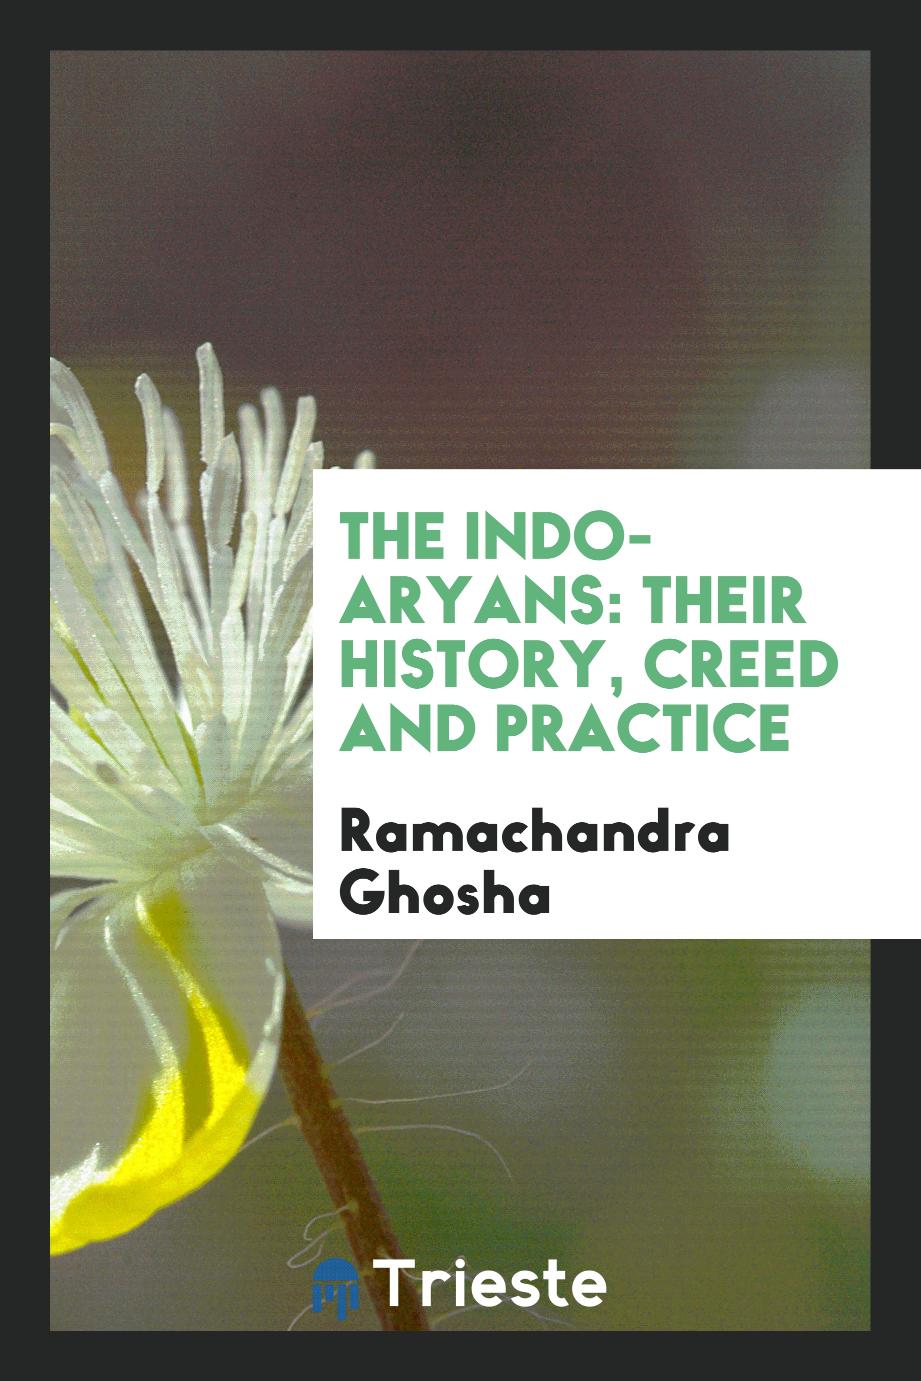 The Indo-Aryans: Their History, Creed and Practice